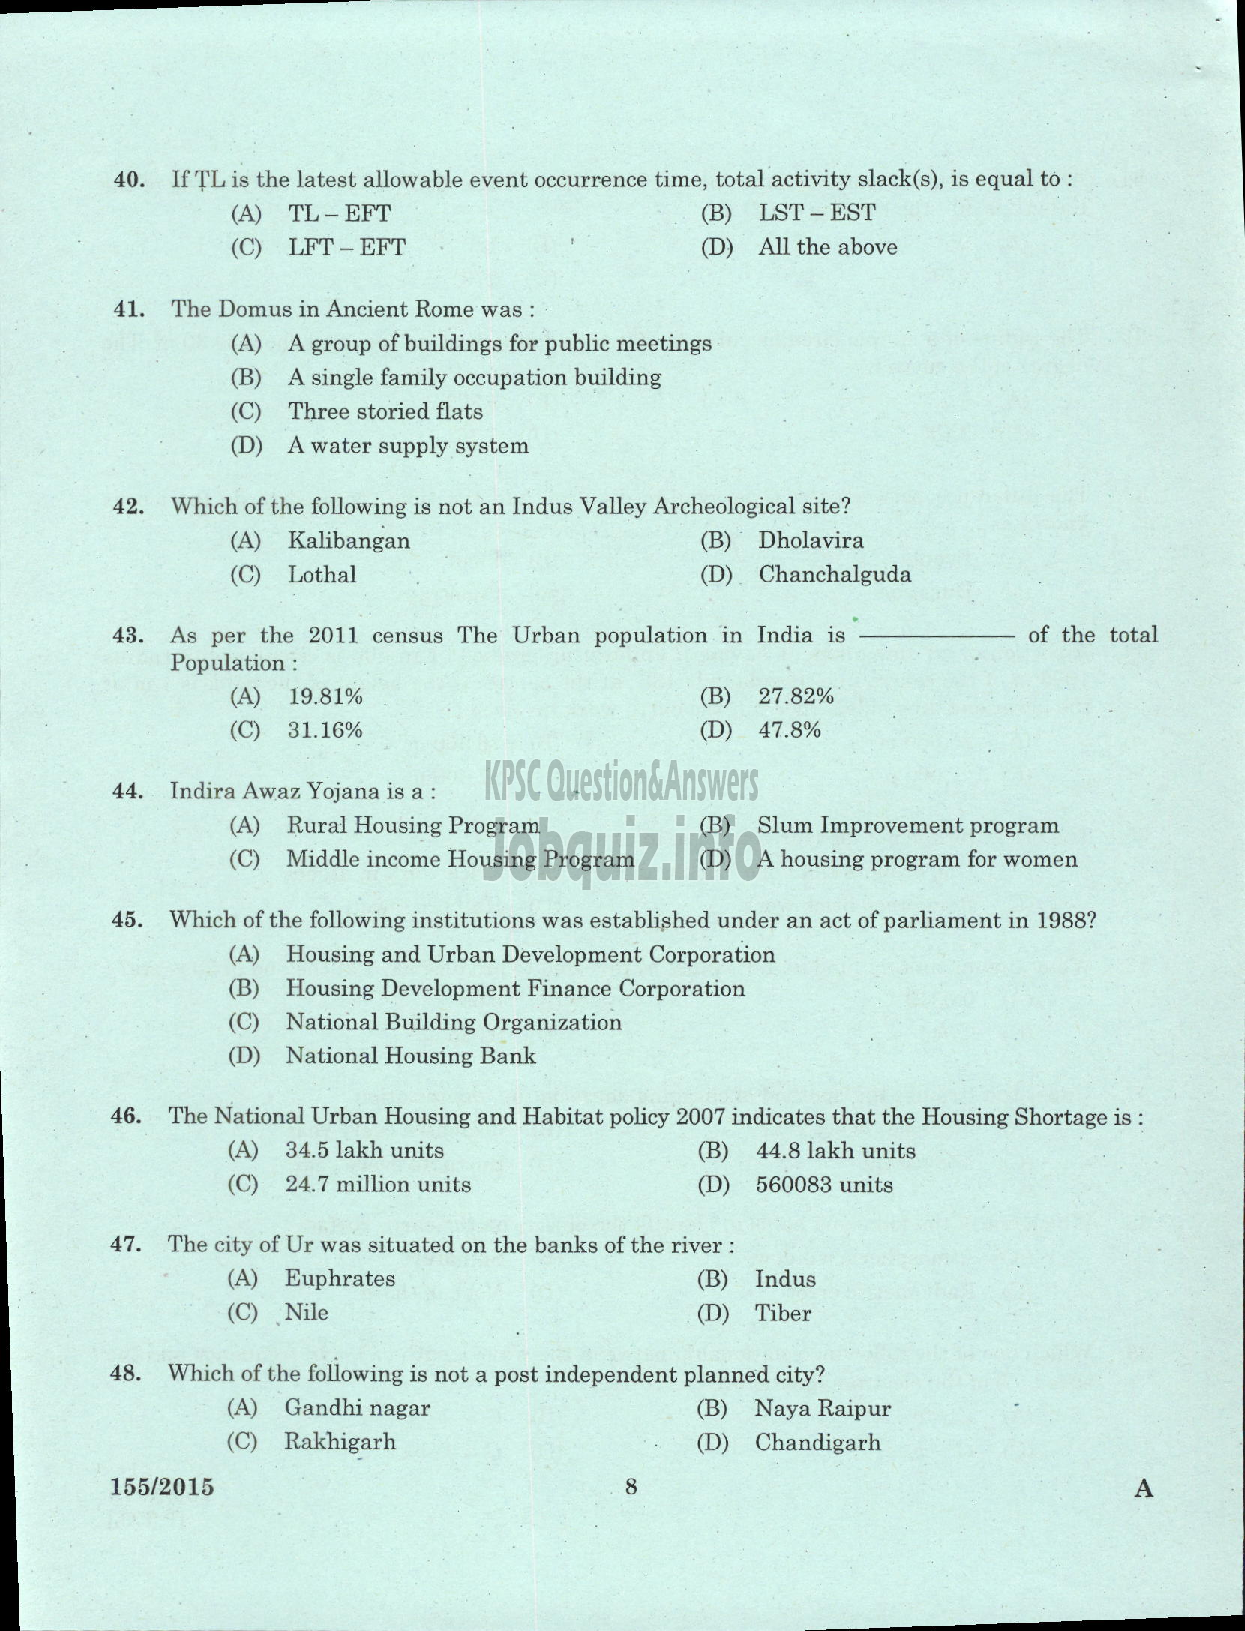 Kerala PSC Question Paper - ASSISTANT TOWN PLANNER TOWN AND COUNTRY PLANNING-6